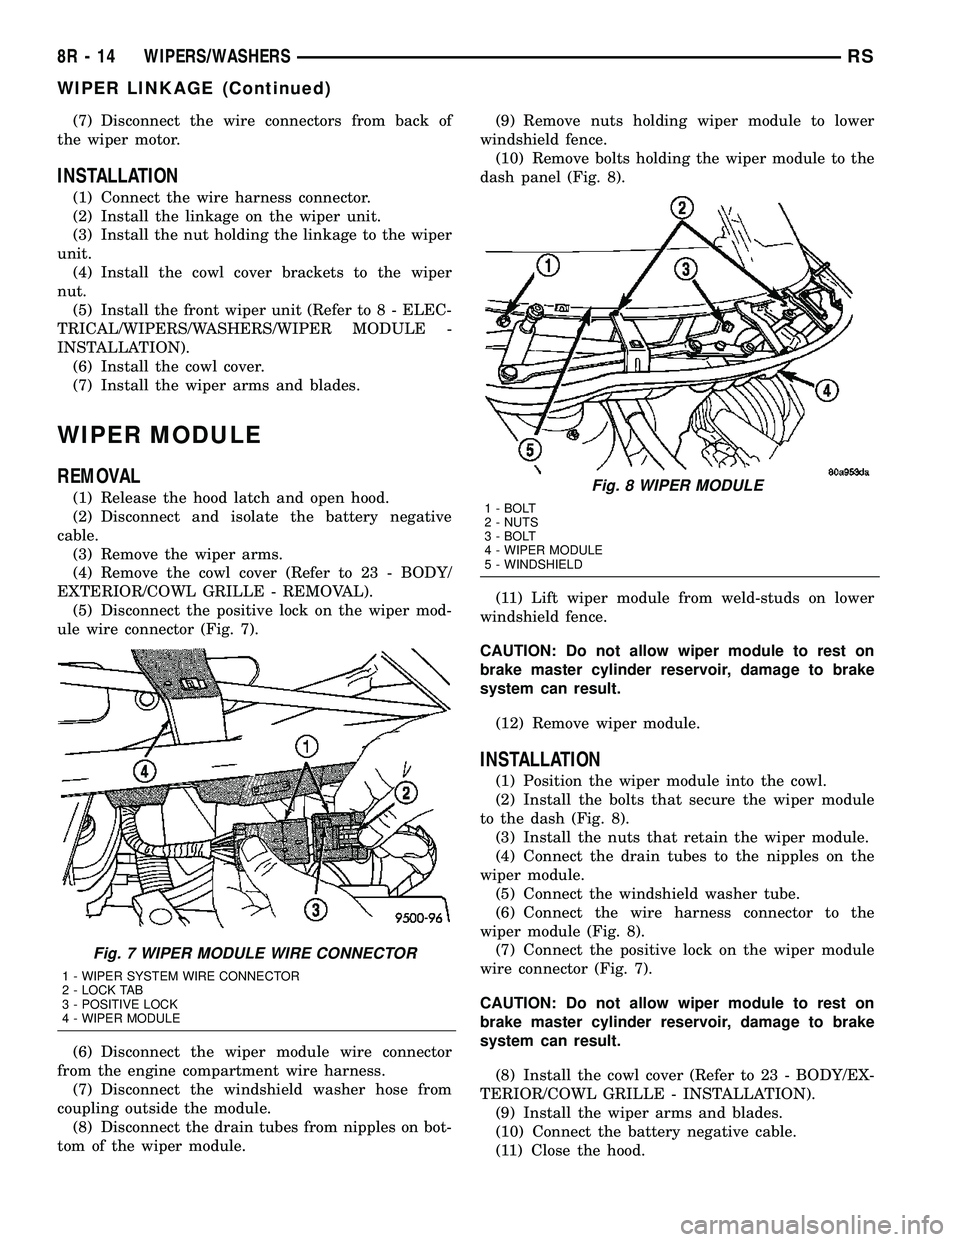 CHRYSLER VOYAGER 2005  Service Manual (7) Disconnect the wire connectors from back of
the wiper motor.
INSTALLATION
(1) Connect the wire harness connector.
(2) Install the linkage on the wiper unit.
(3) Install the nut holding the linkage